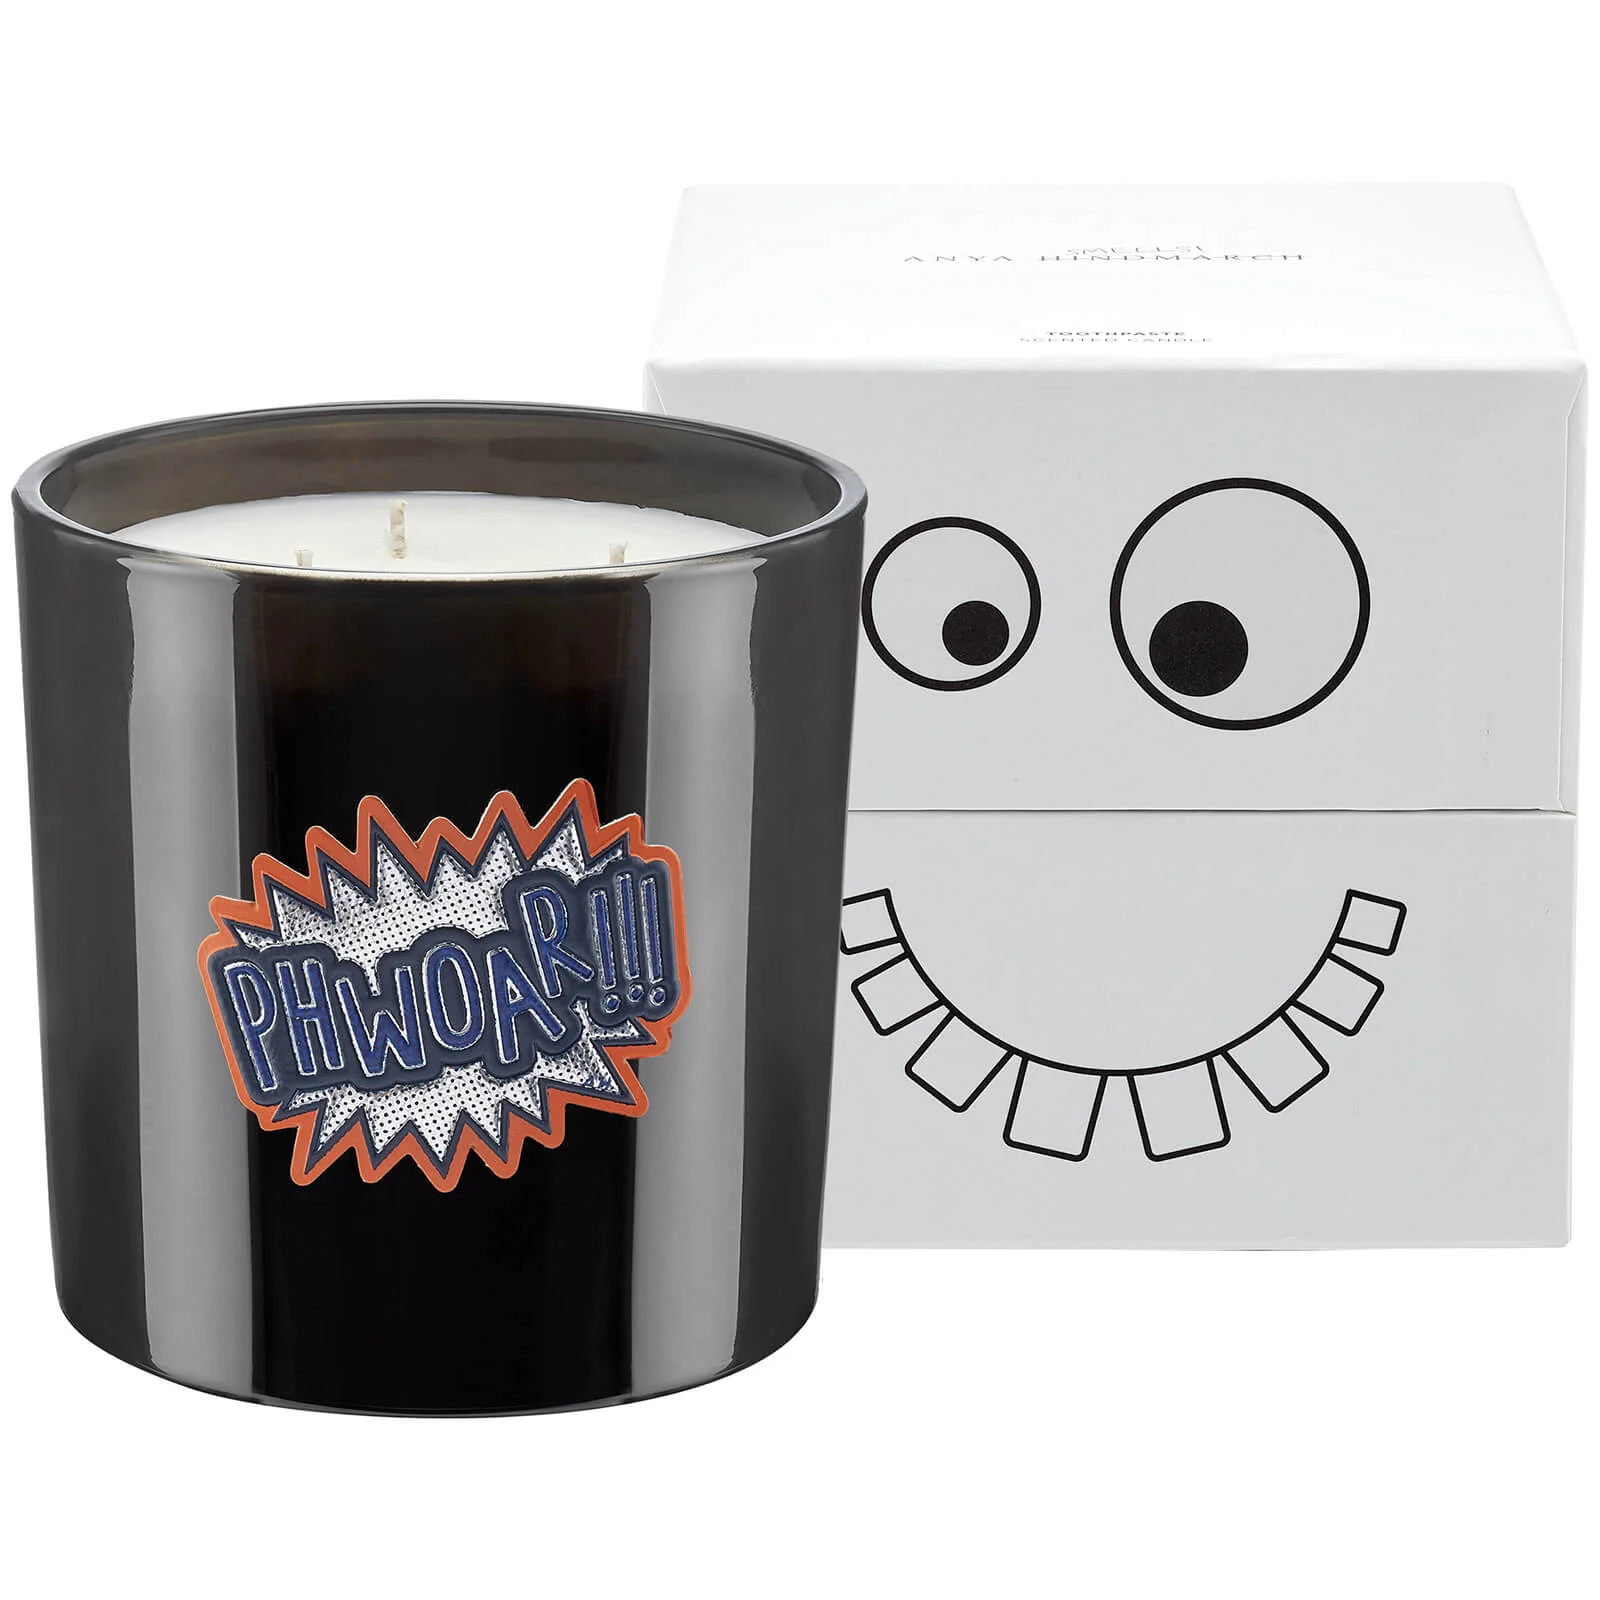 Anya Hindmarch Smells - Large Scented Candle - Tooth Paste Image 1